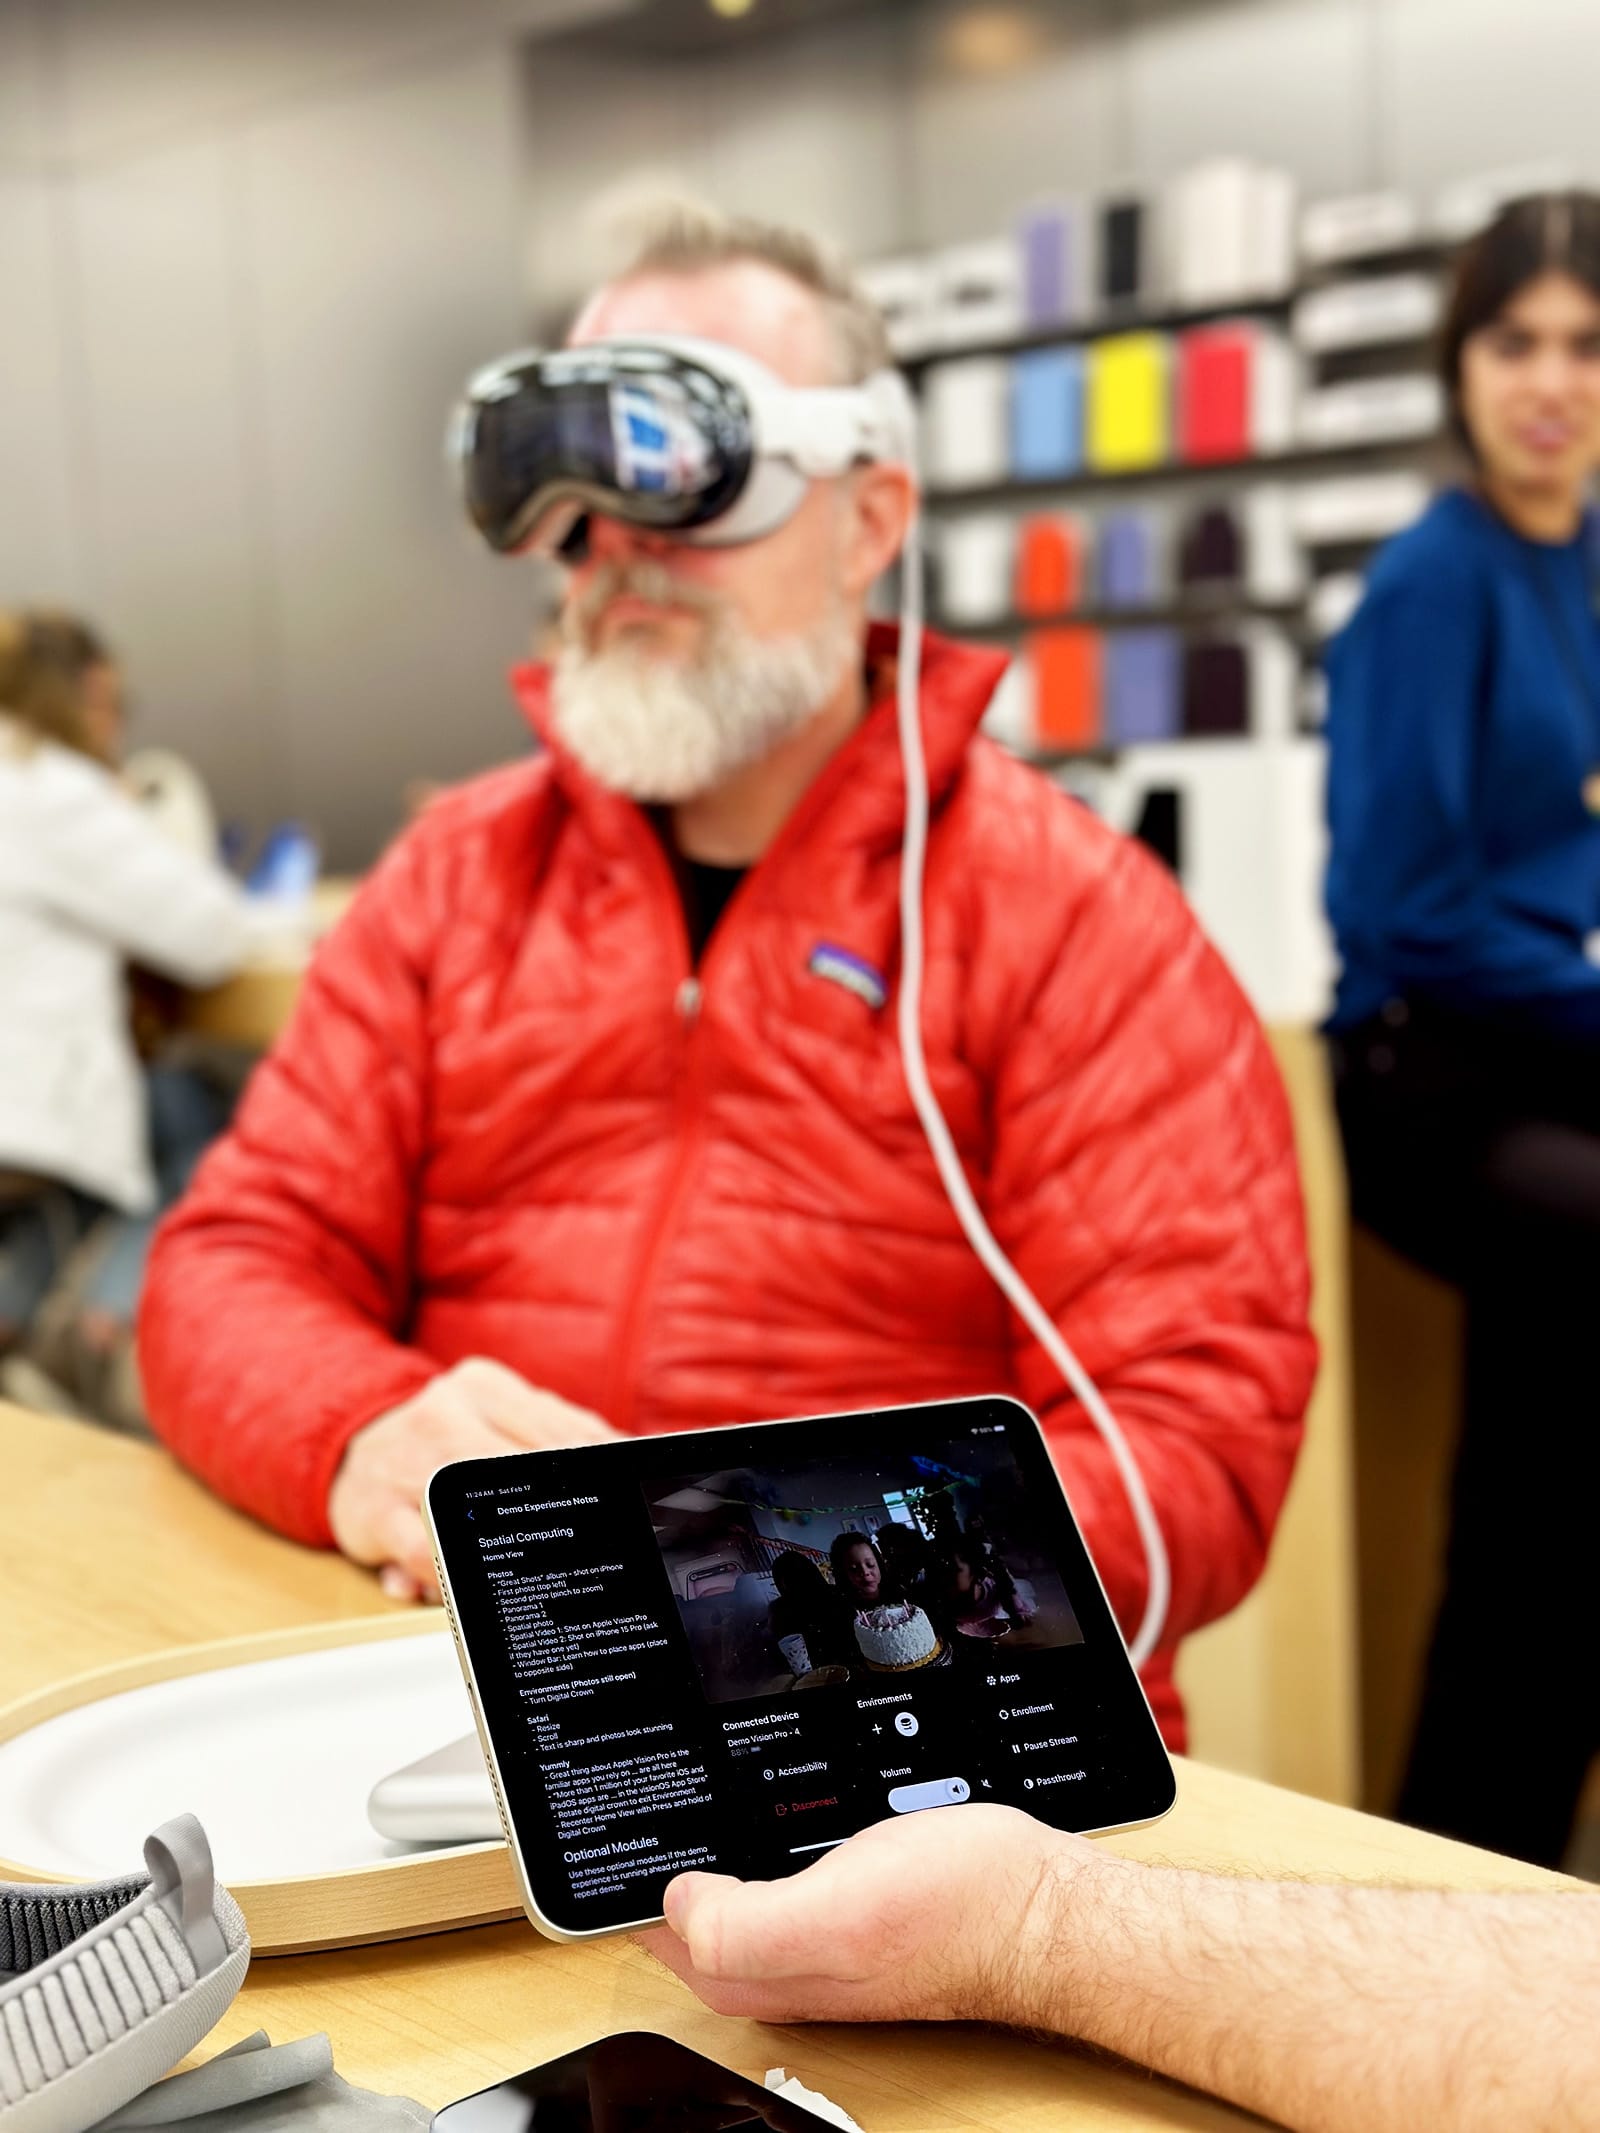 A man holding an iPad running the demo software while another man wears a Vision Pro headset in the background